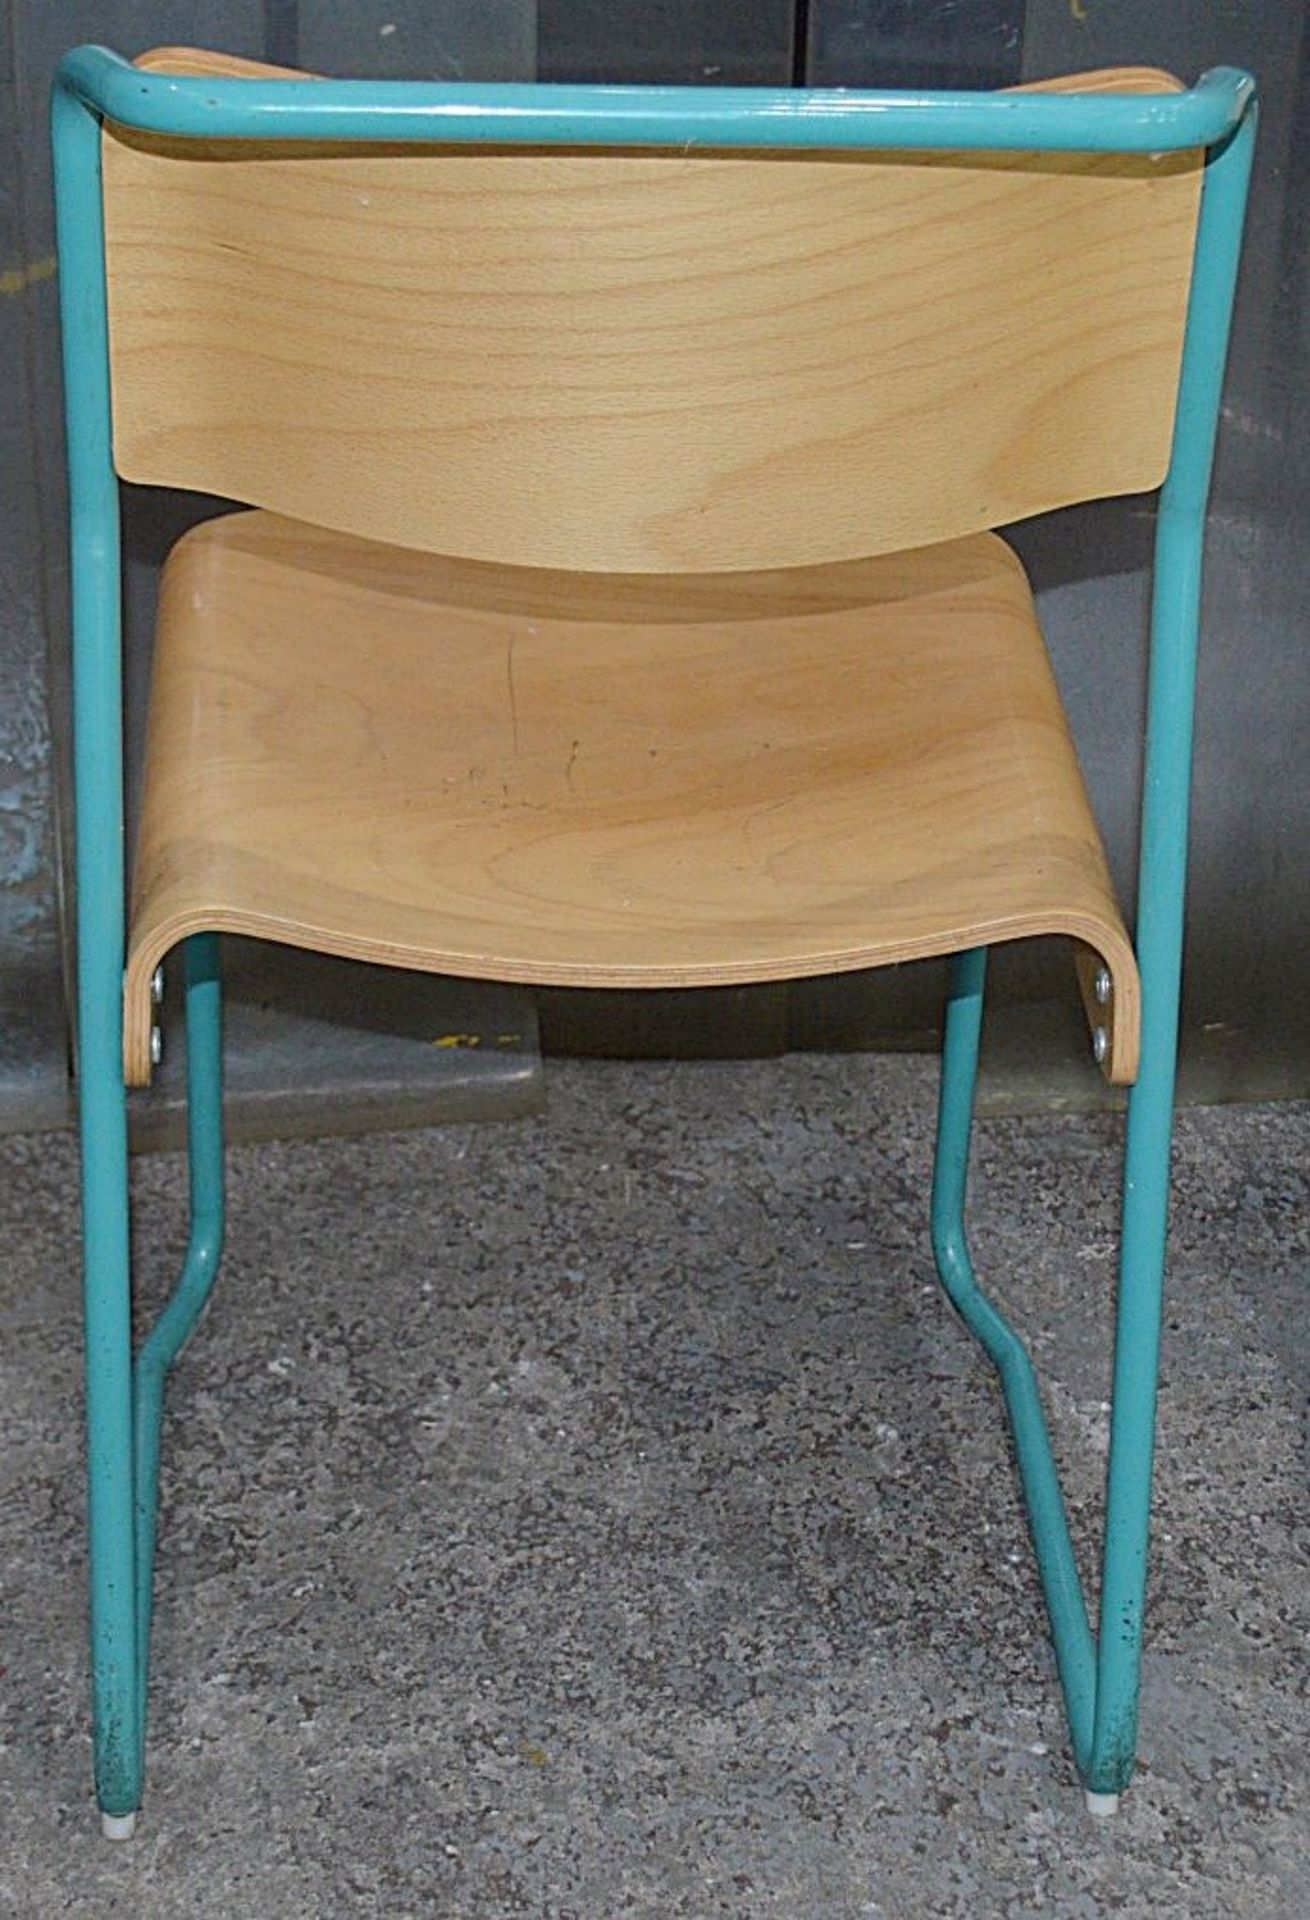 6 x Contemporary Stackable Bistro / Bar Chairs With Metal Frames With Curved Vanished Wooden Seats - Image 4 of 12